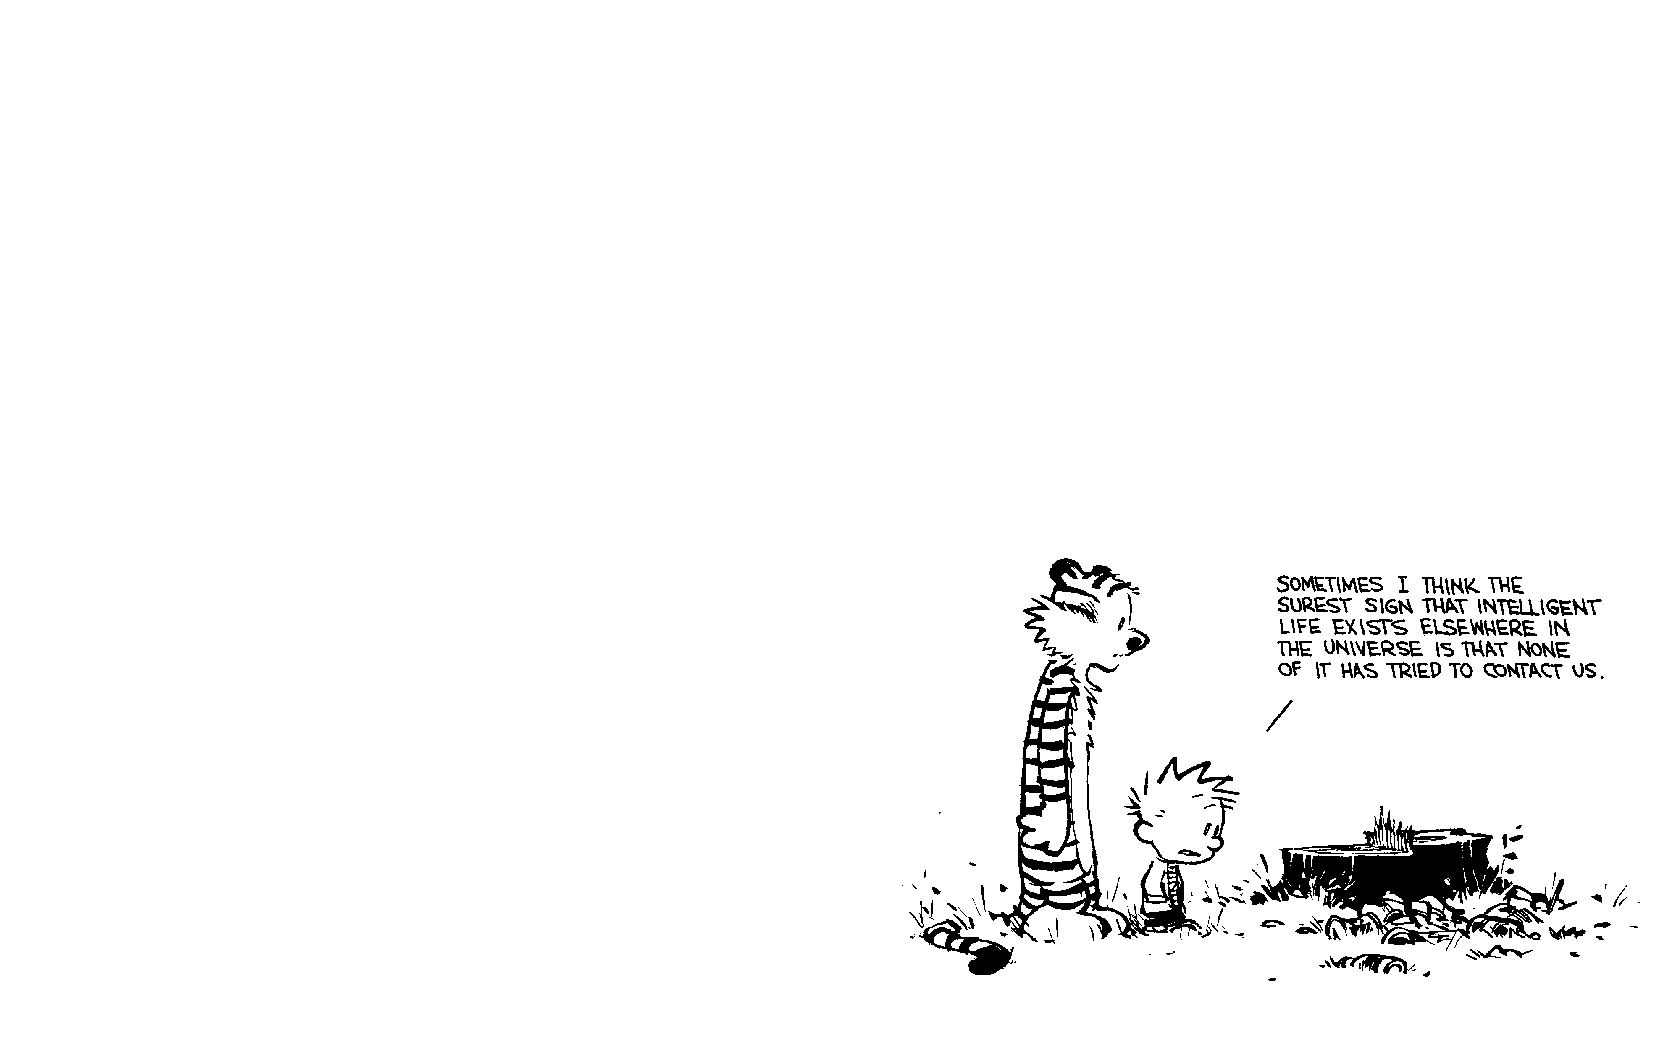 Free Download Calvin Hobbes Calvin And Hobbes Wallpaper Background 1680x1050 For Your Desktop Mobile Tablet Explore 50 Reddit Calvin And Hobbes Wallpaper Calvin And Hobbes Hd Wallpaper Calvin And